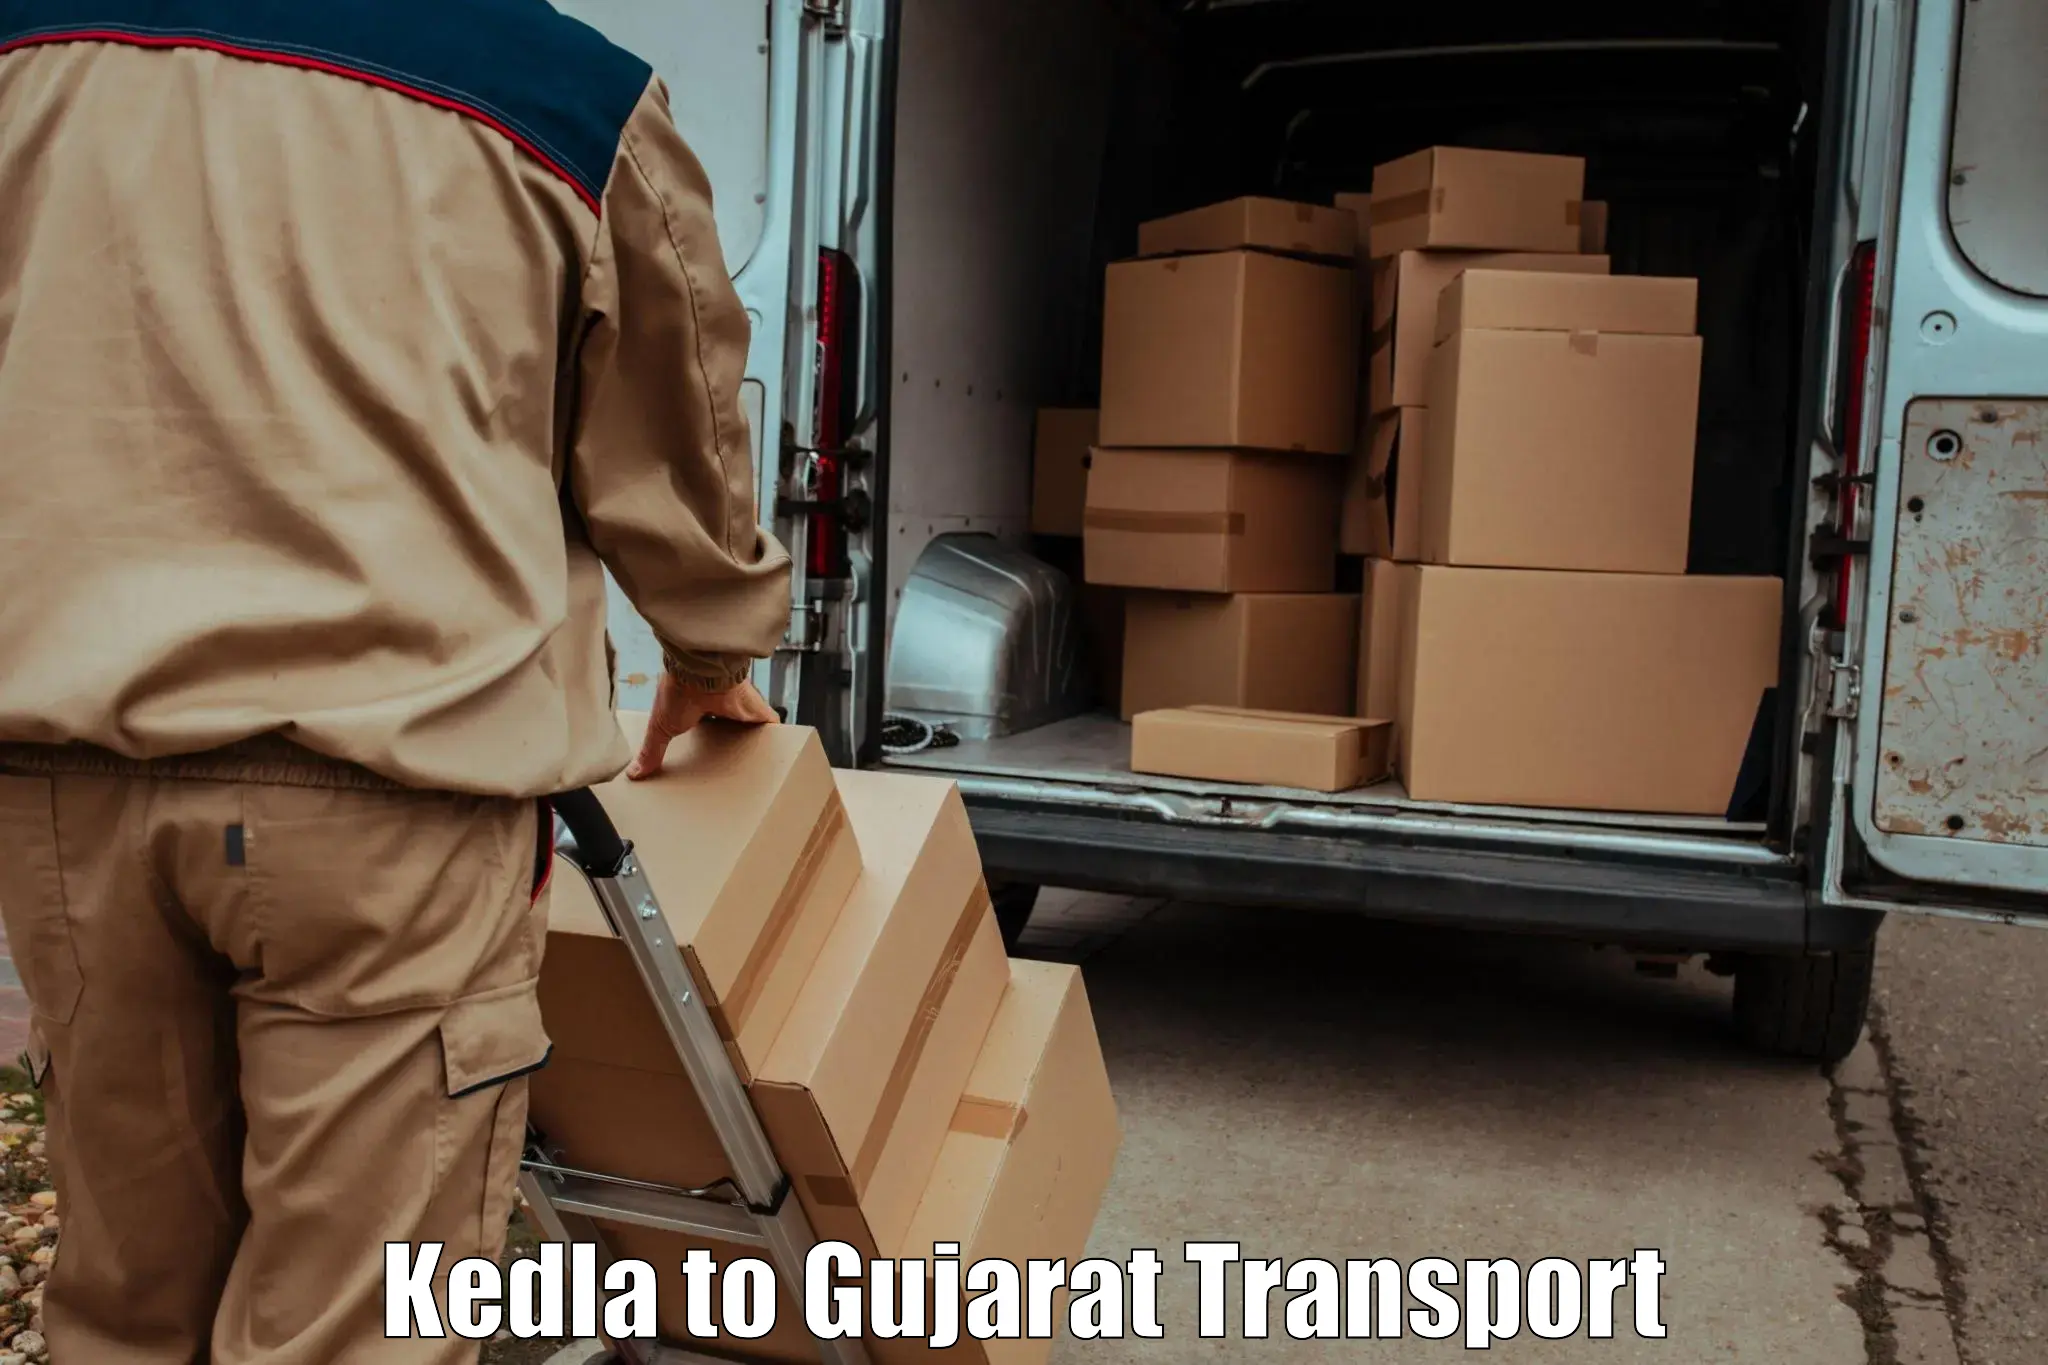 Transport bike from one state to another Kedla to Porbandar